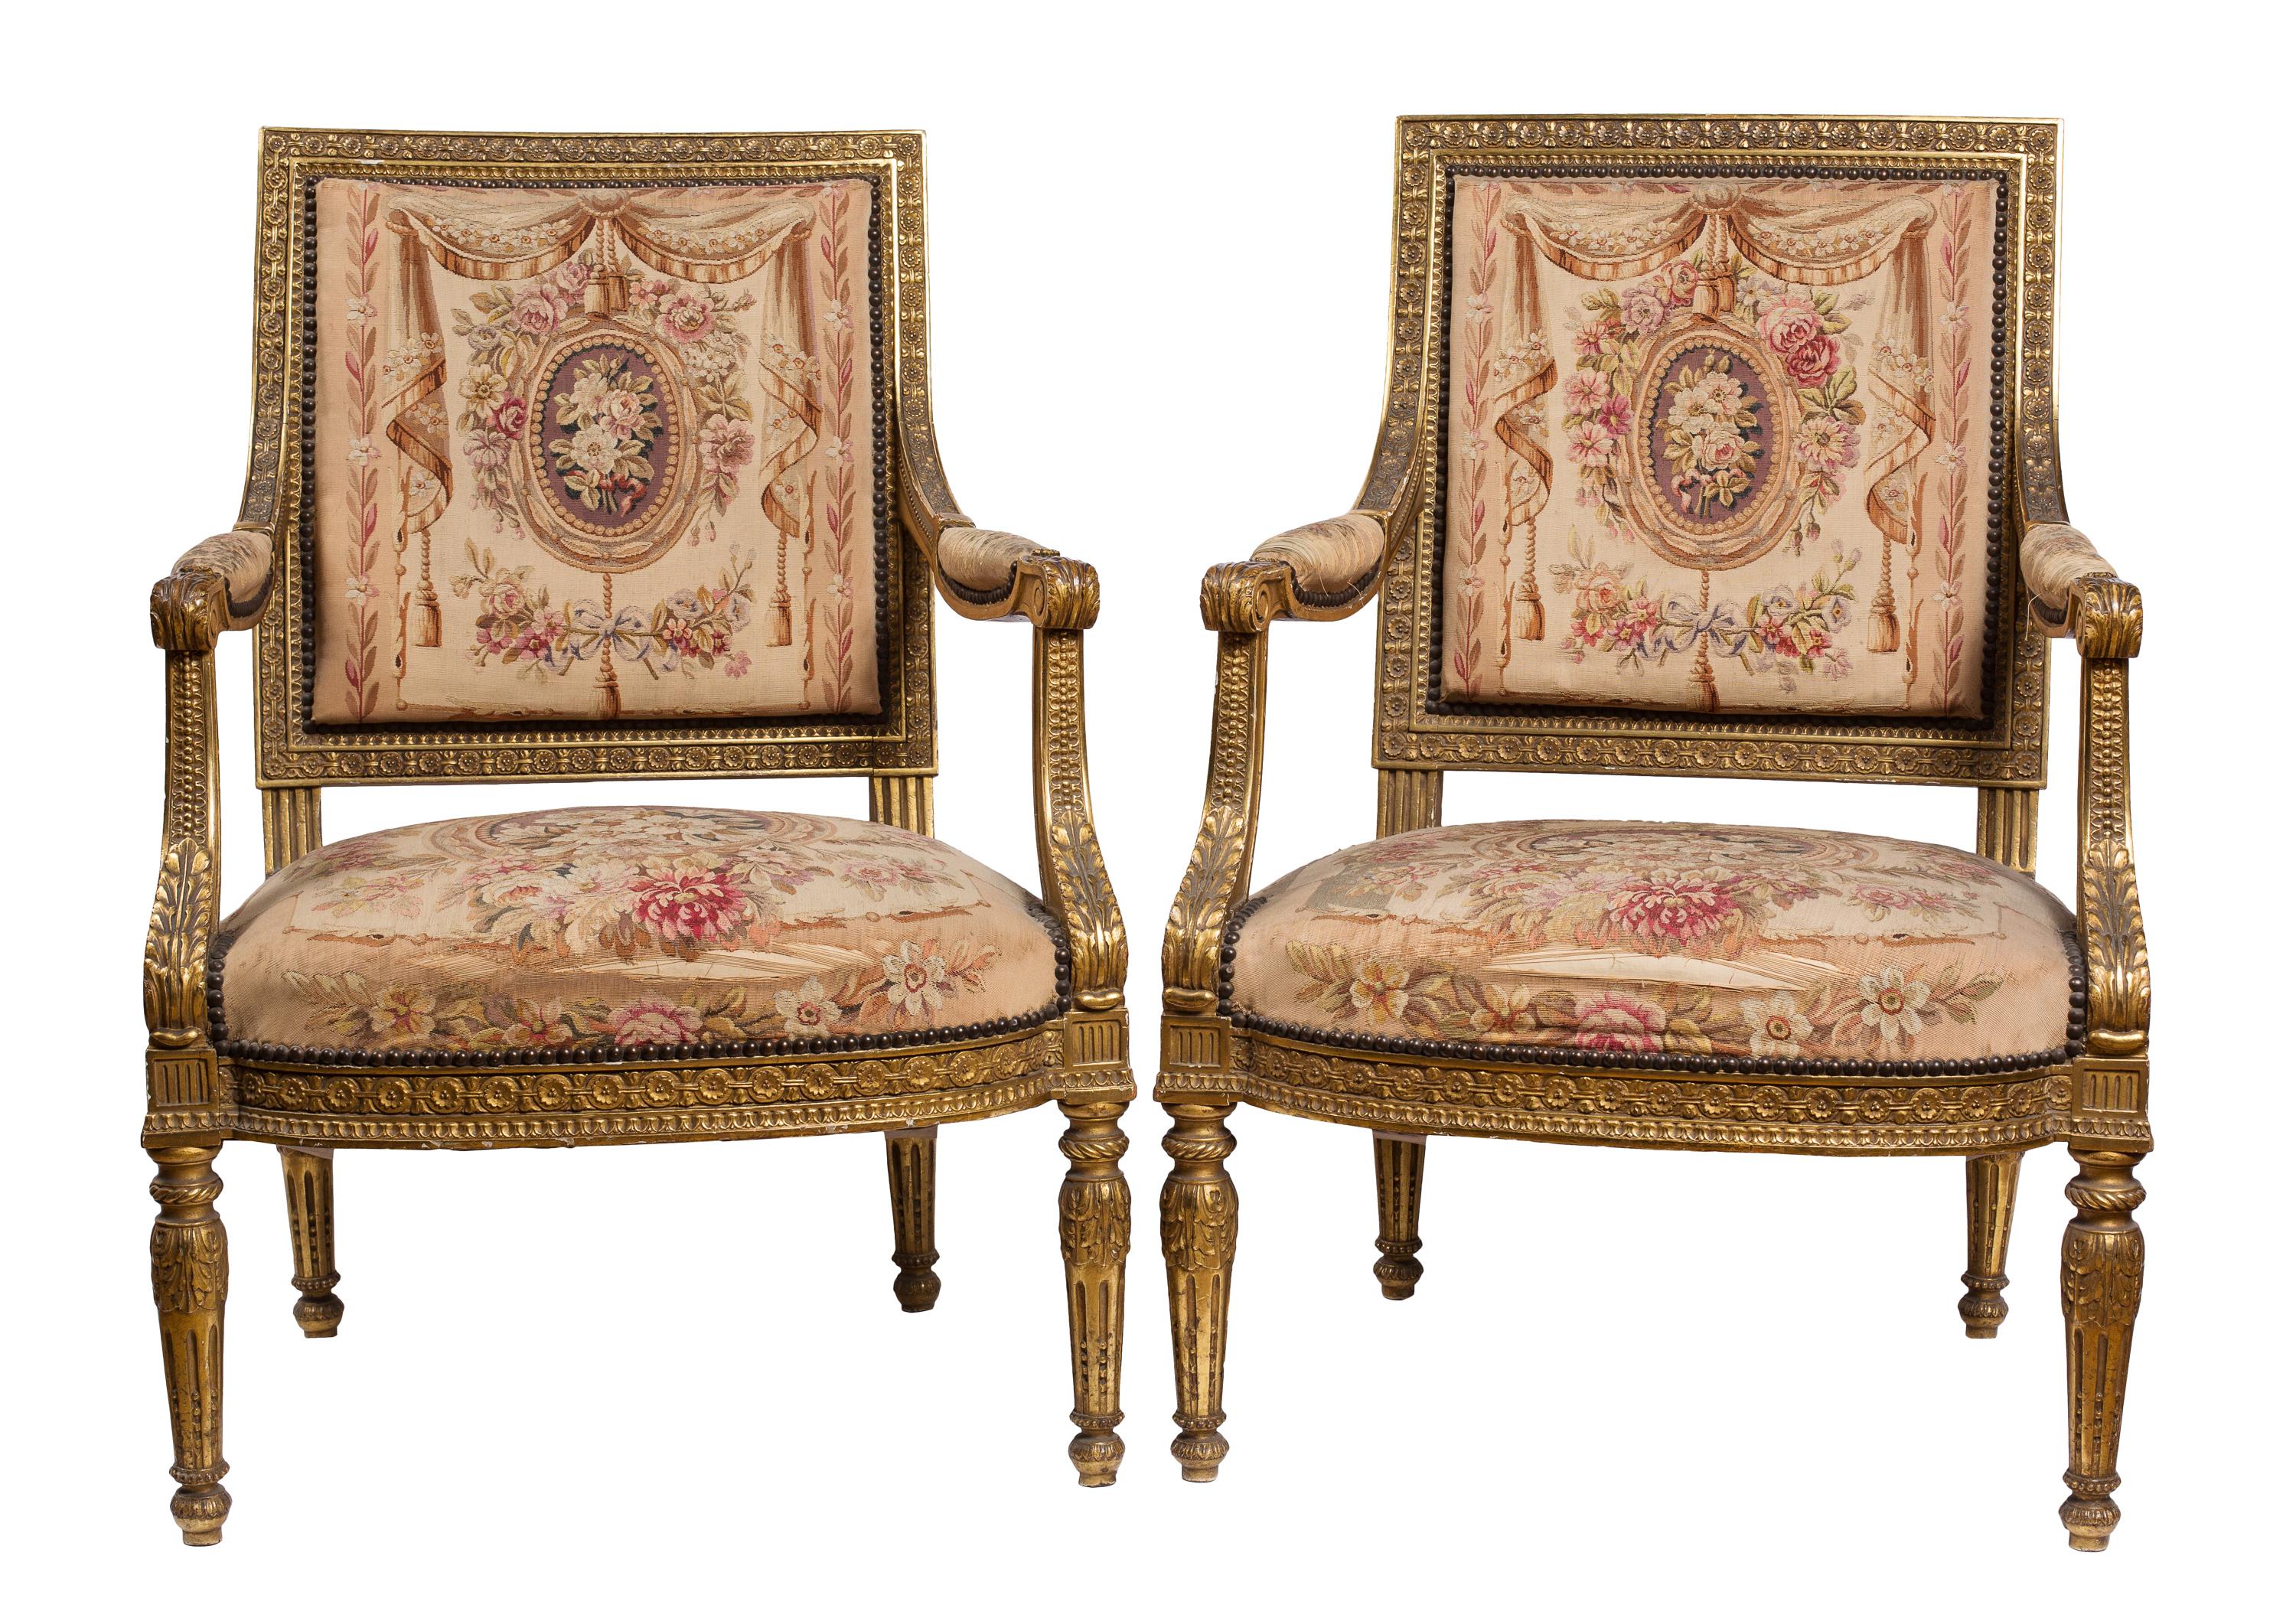 Antique Louis XVI Style Sofa, 4 Chair Salon Suite, Aubusson Tapestry Upholstery In Fair Condition For Sale In Madrid, ES